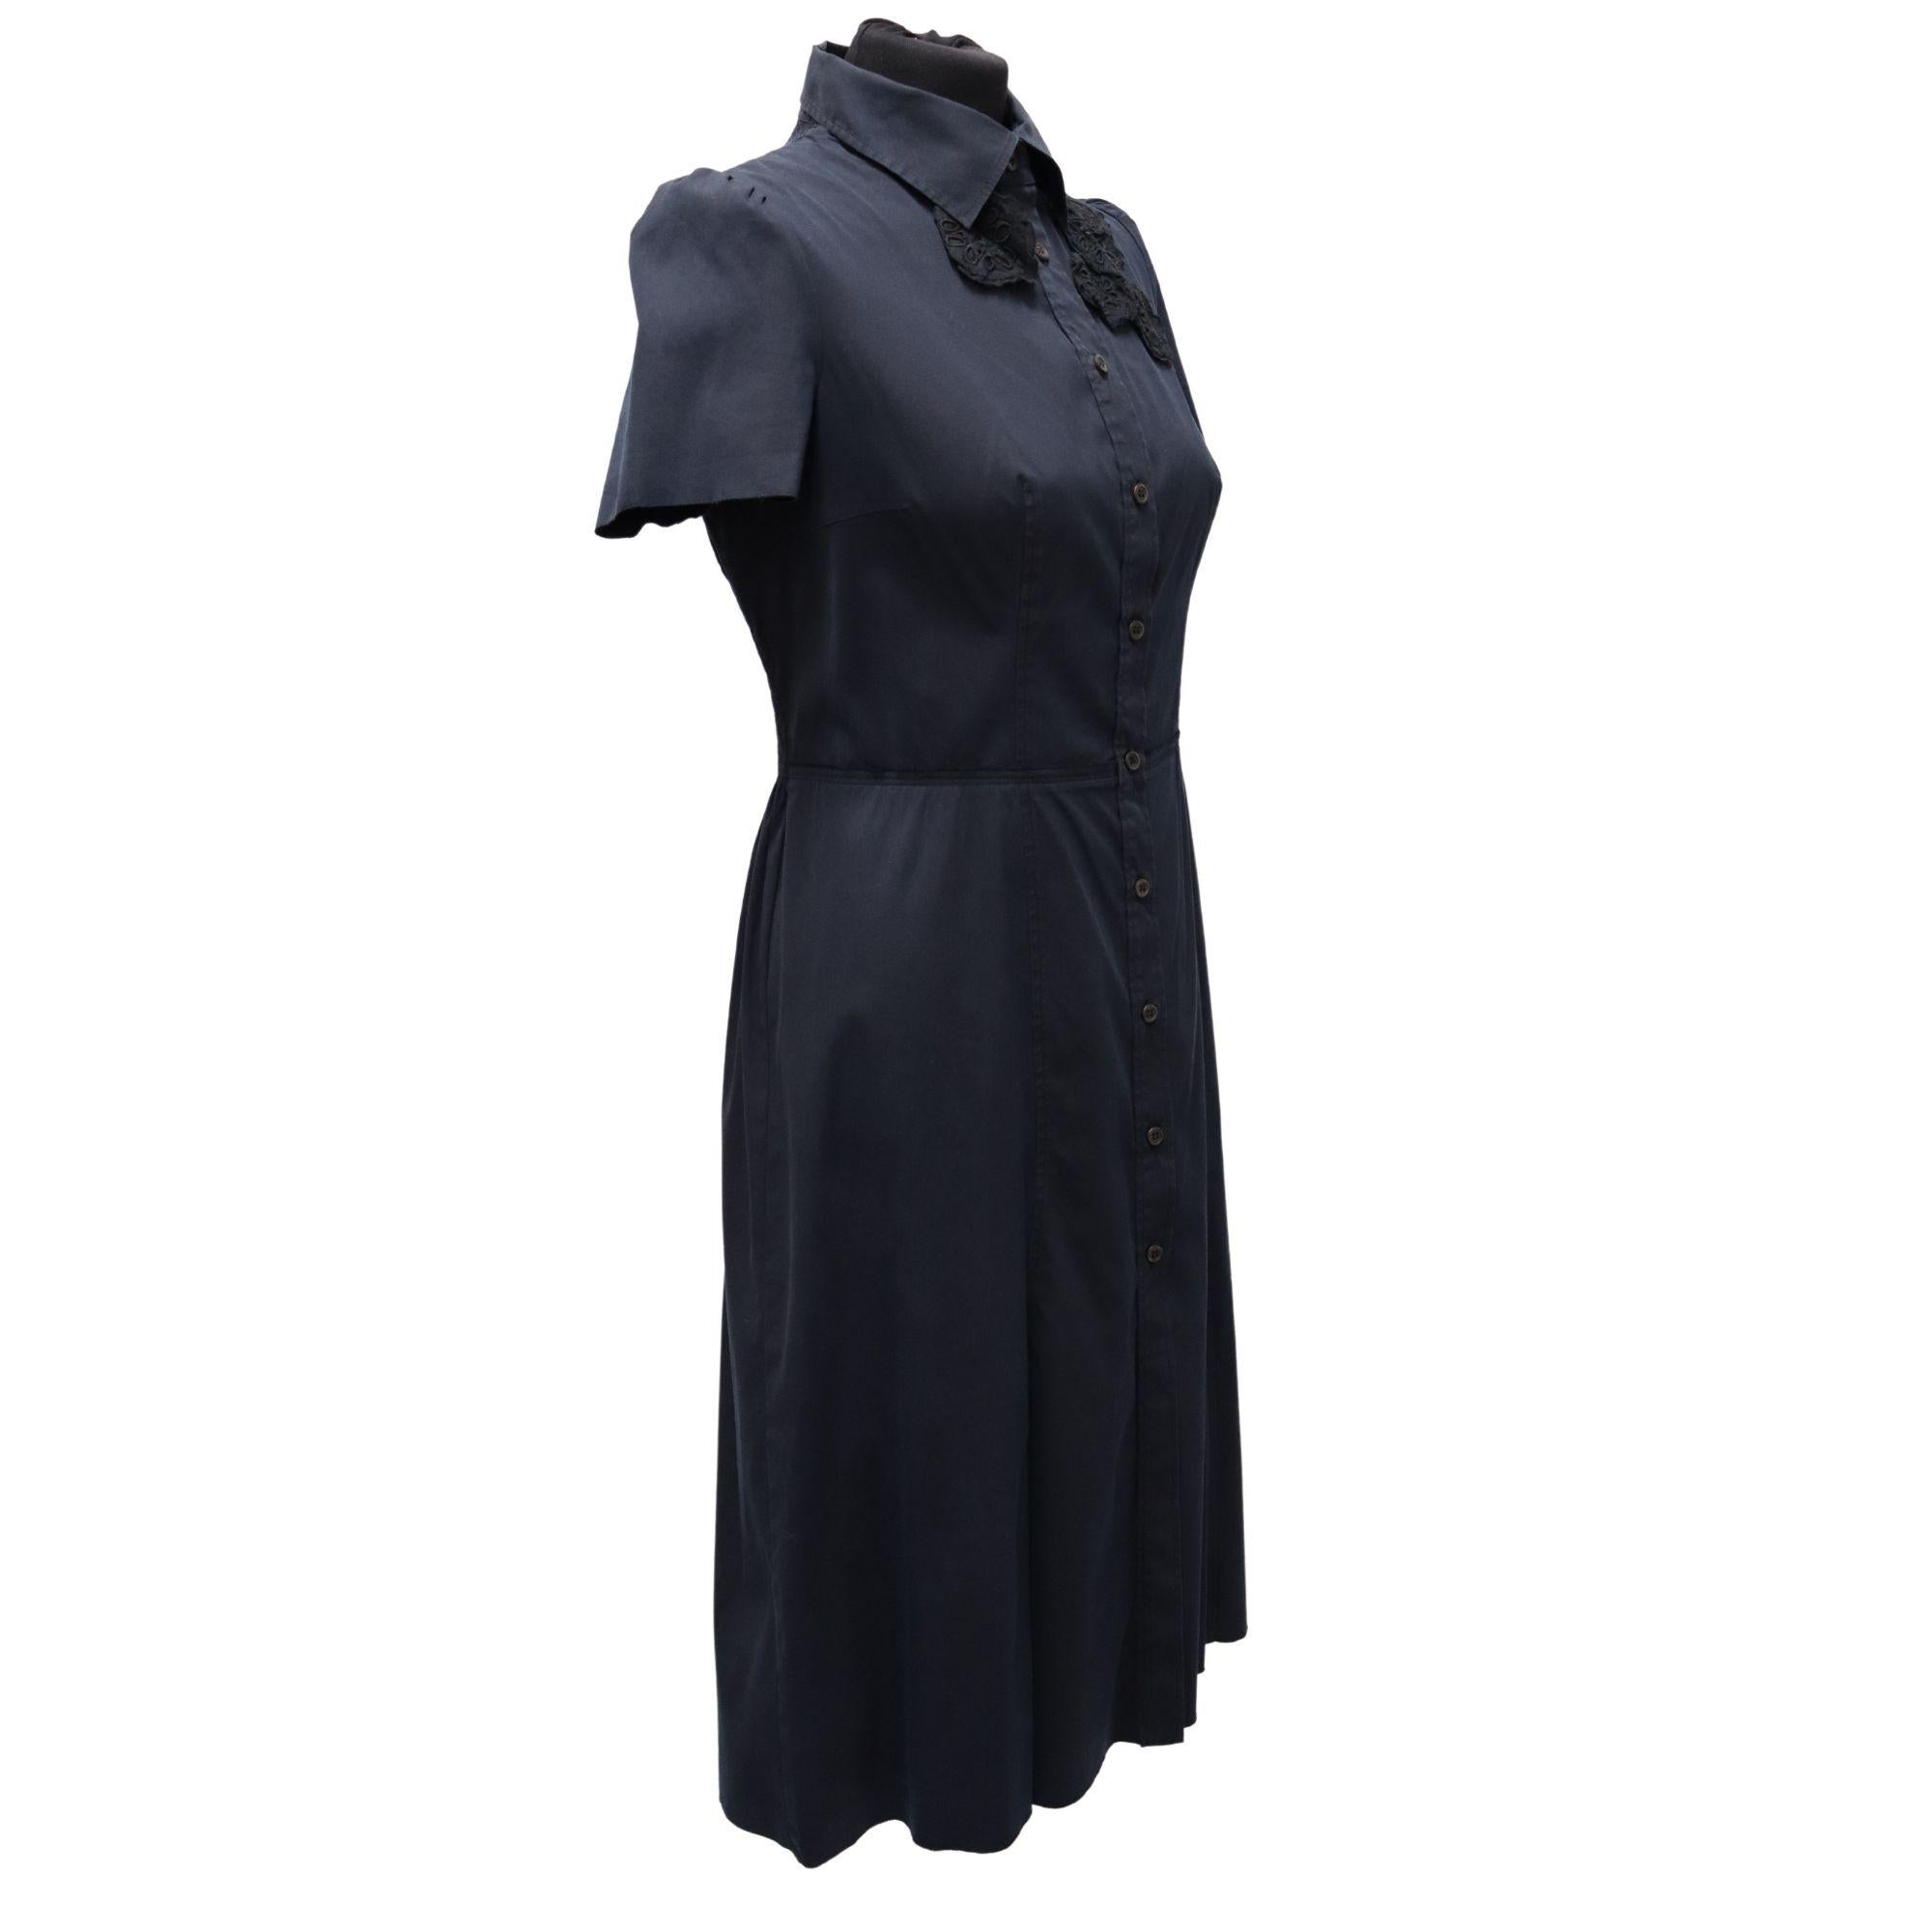 Prada collared knee length shirt dress with floral appliqués at the shoulders. Stretch/elastic panel at the back for a more comfortable fit. Button up closure.

Tag Size: 46 (fits more like a US8)

Measurements: (Approx)
Shoulder 36cm
Bust